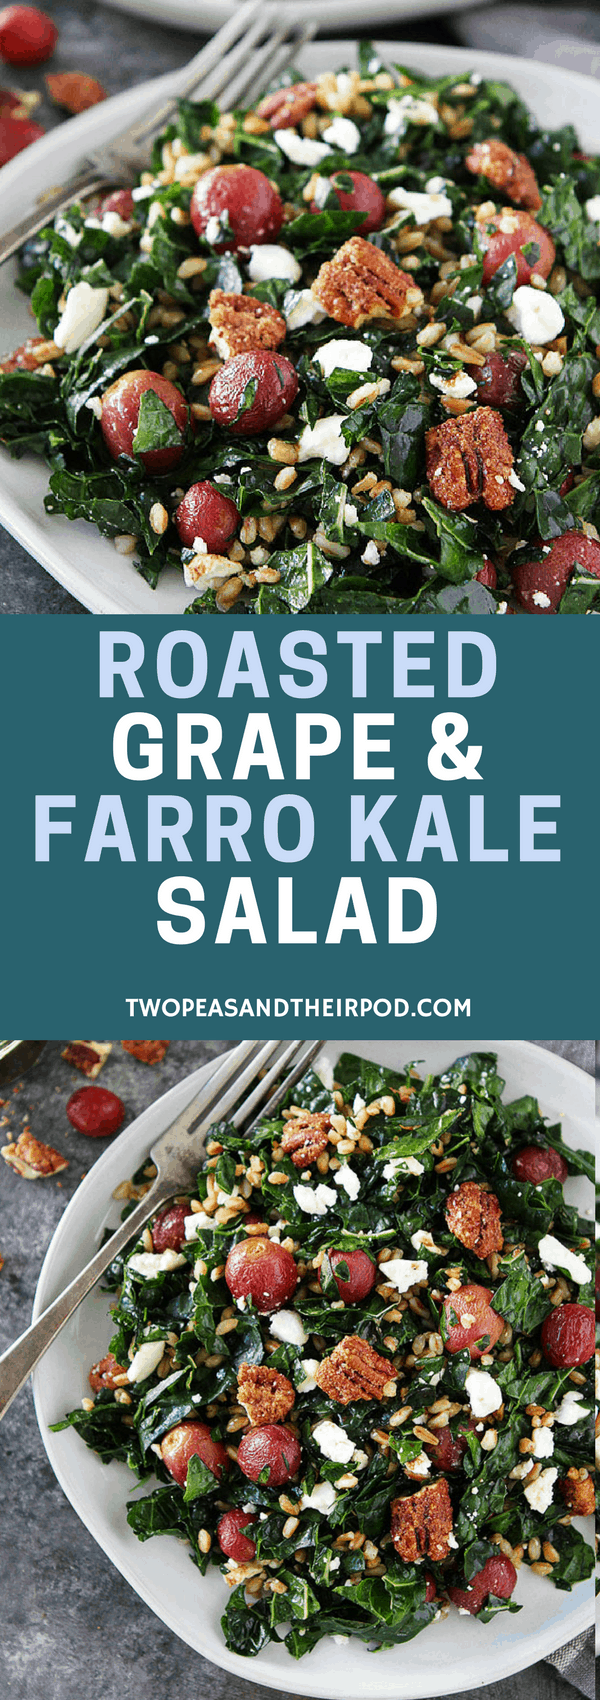 Roasted Grape and Farro Kale Salad with candied pecans, feta cheese, and balsamic dressing is a great salad for lunch or dinner! #salad #vegetarian #farro #kale #kalesalad 